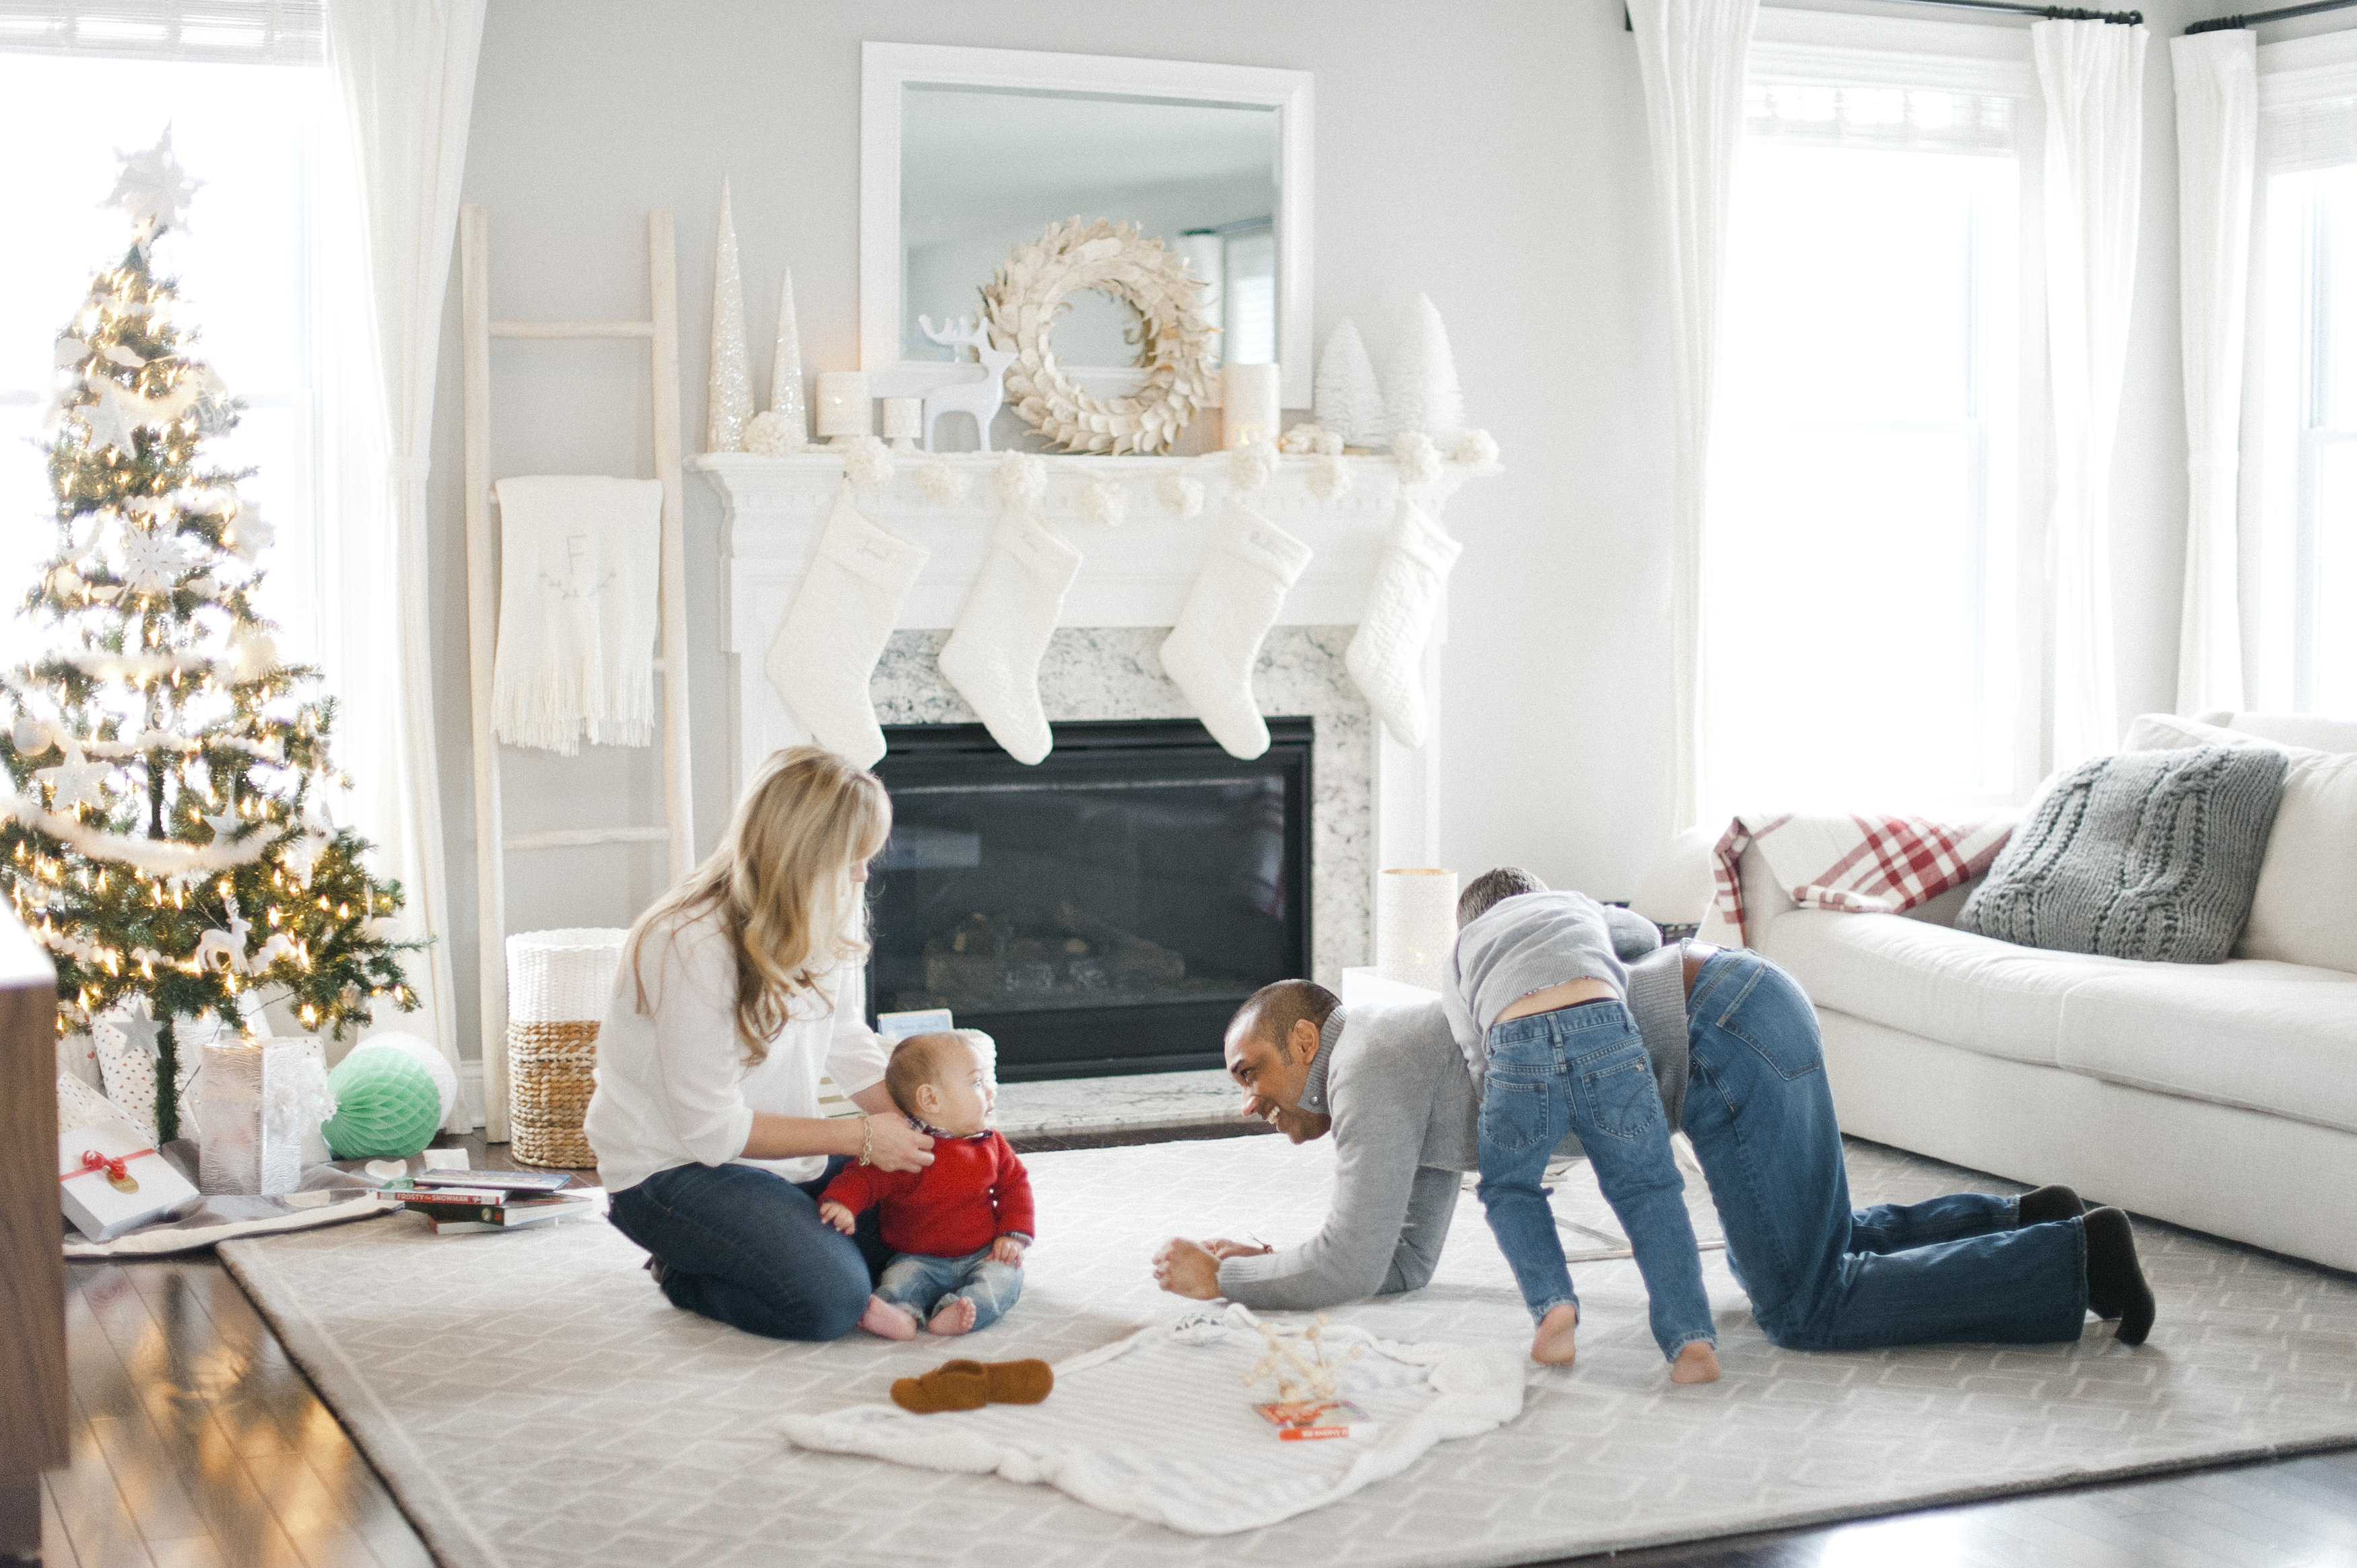 HOW TO DESIGN THE QUINTESSENTIAL FAMILY ROOM